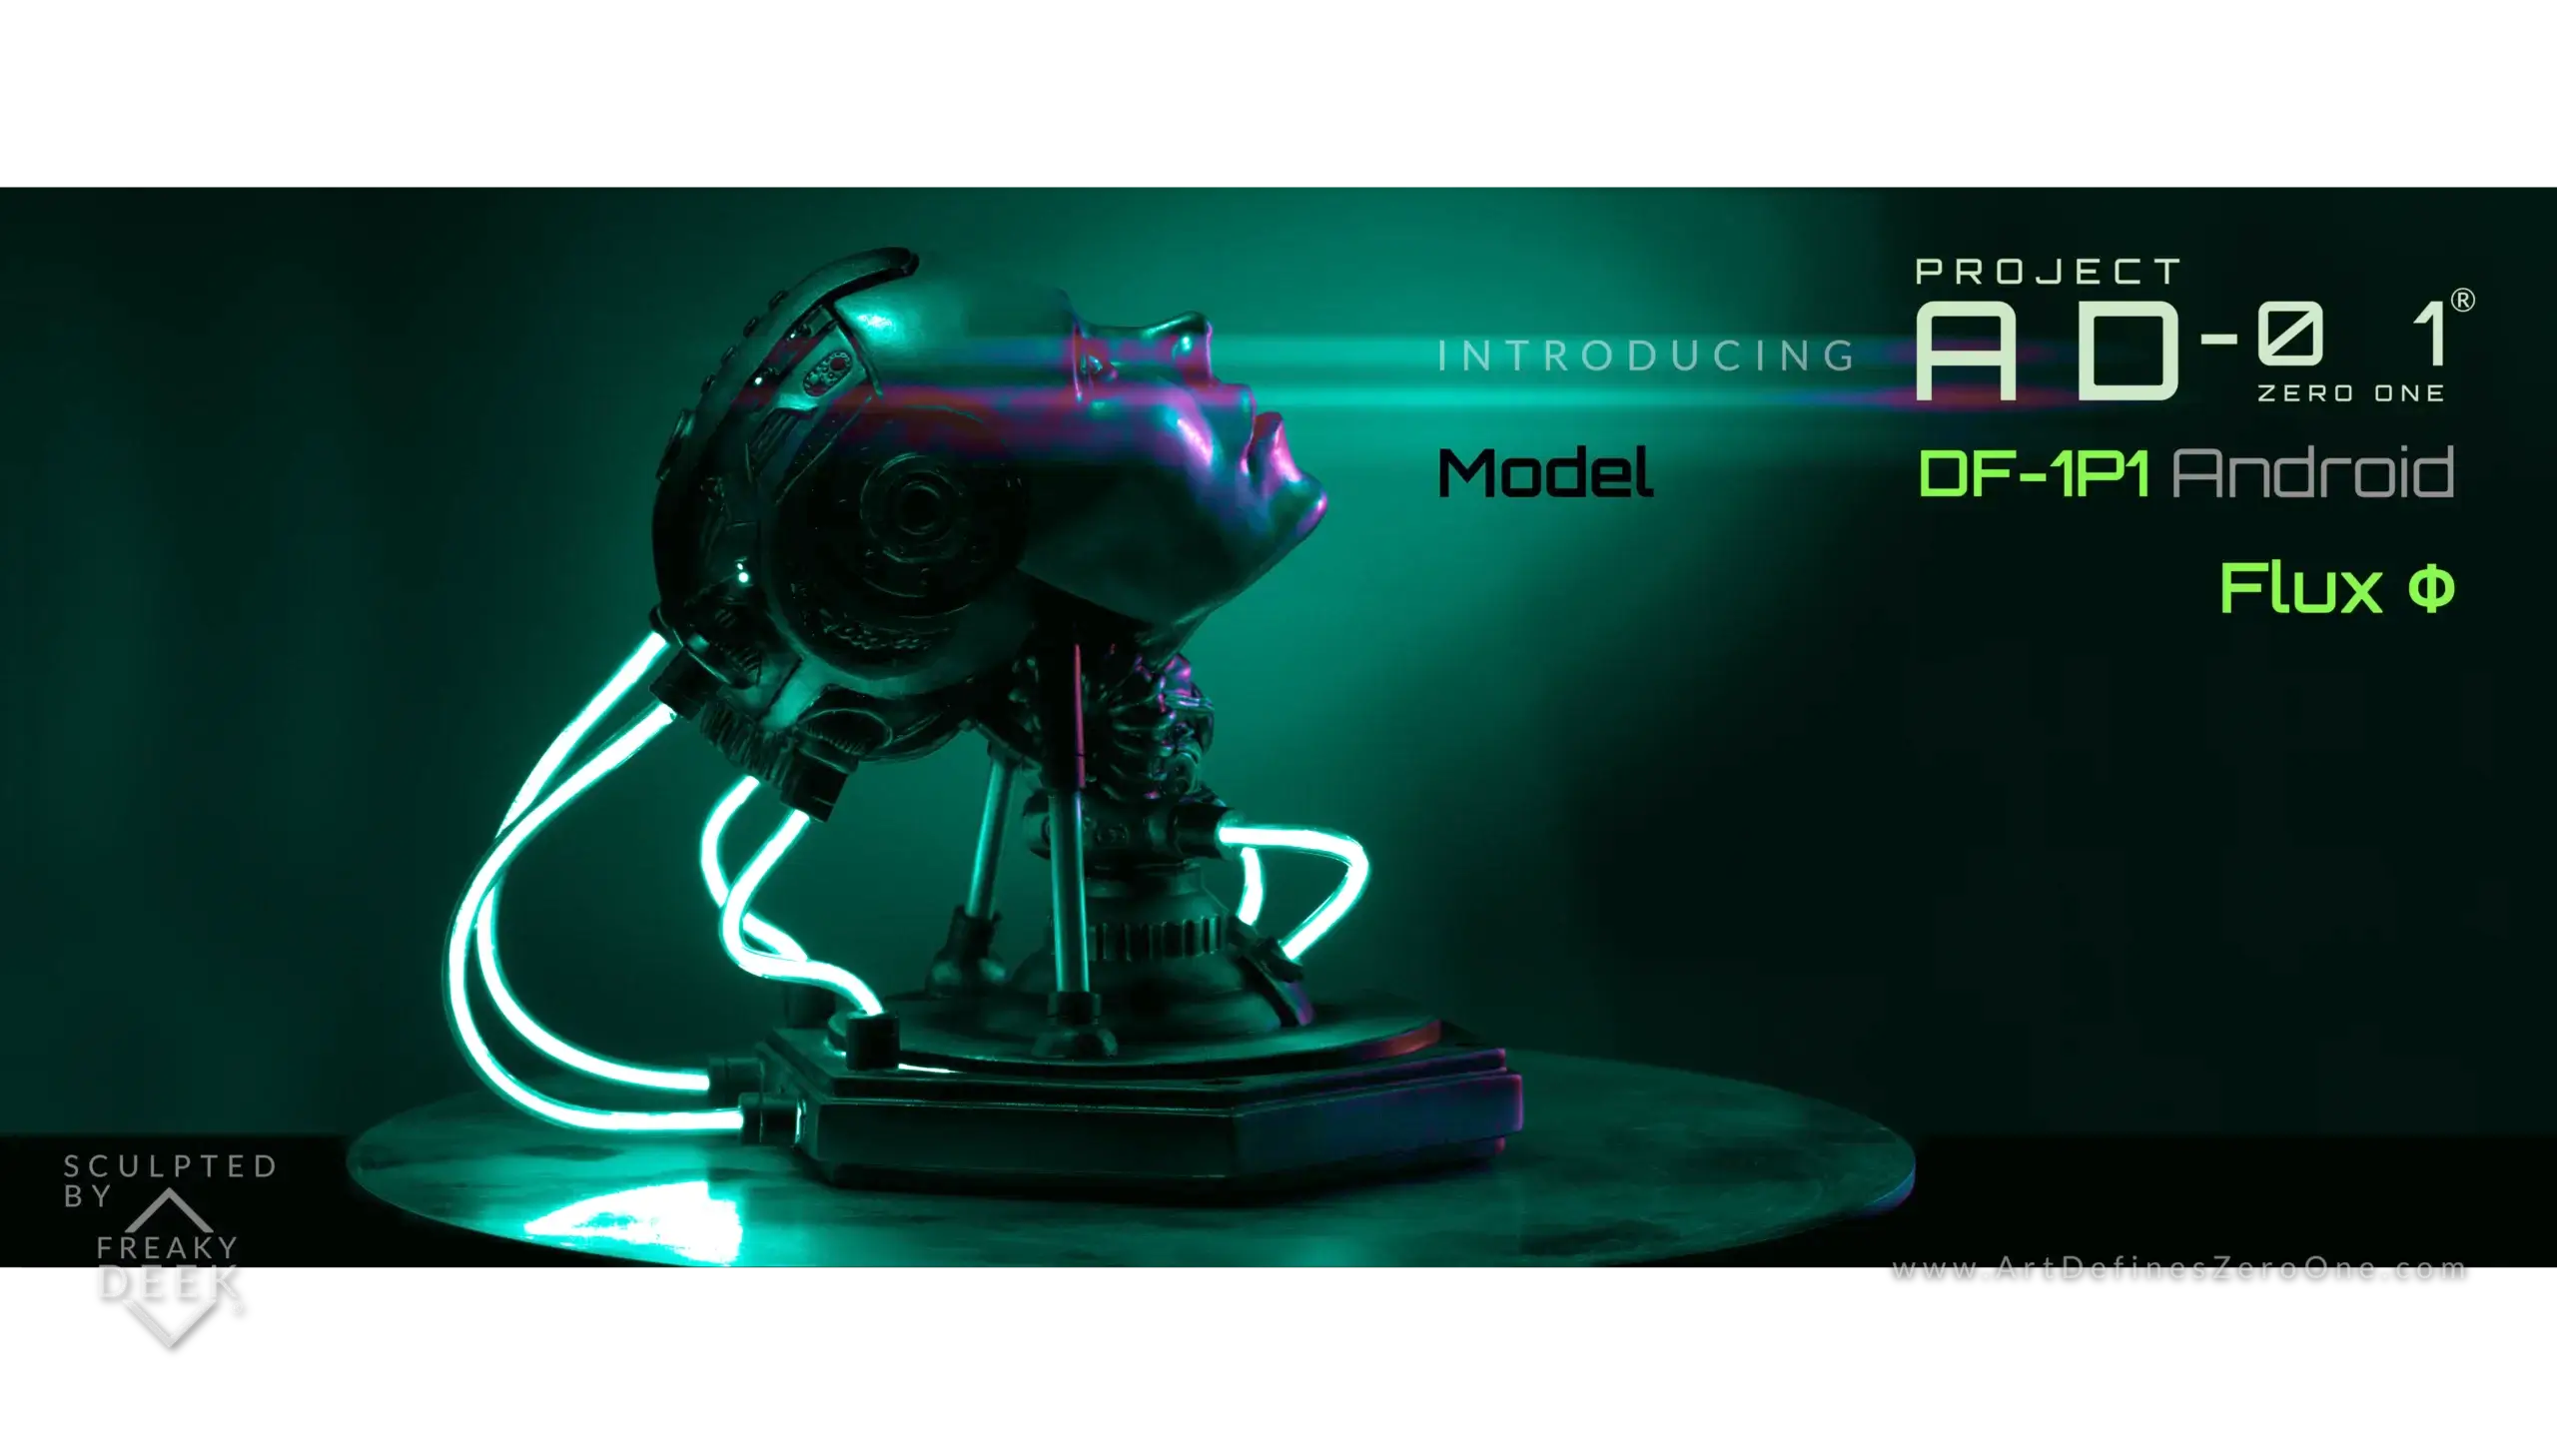 Project AD-01 handmade android sculpture Flux with green LED light side view